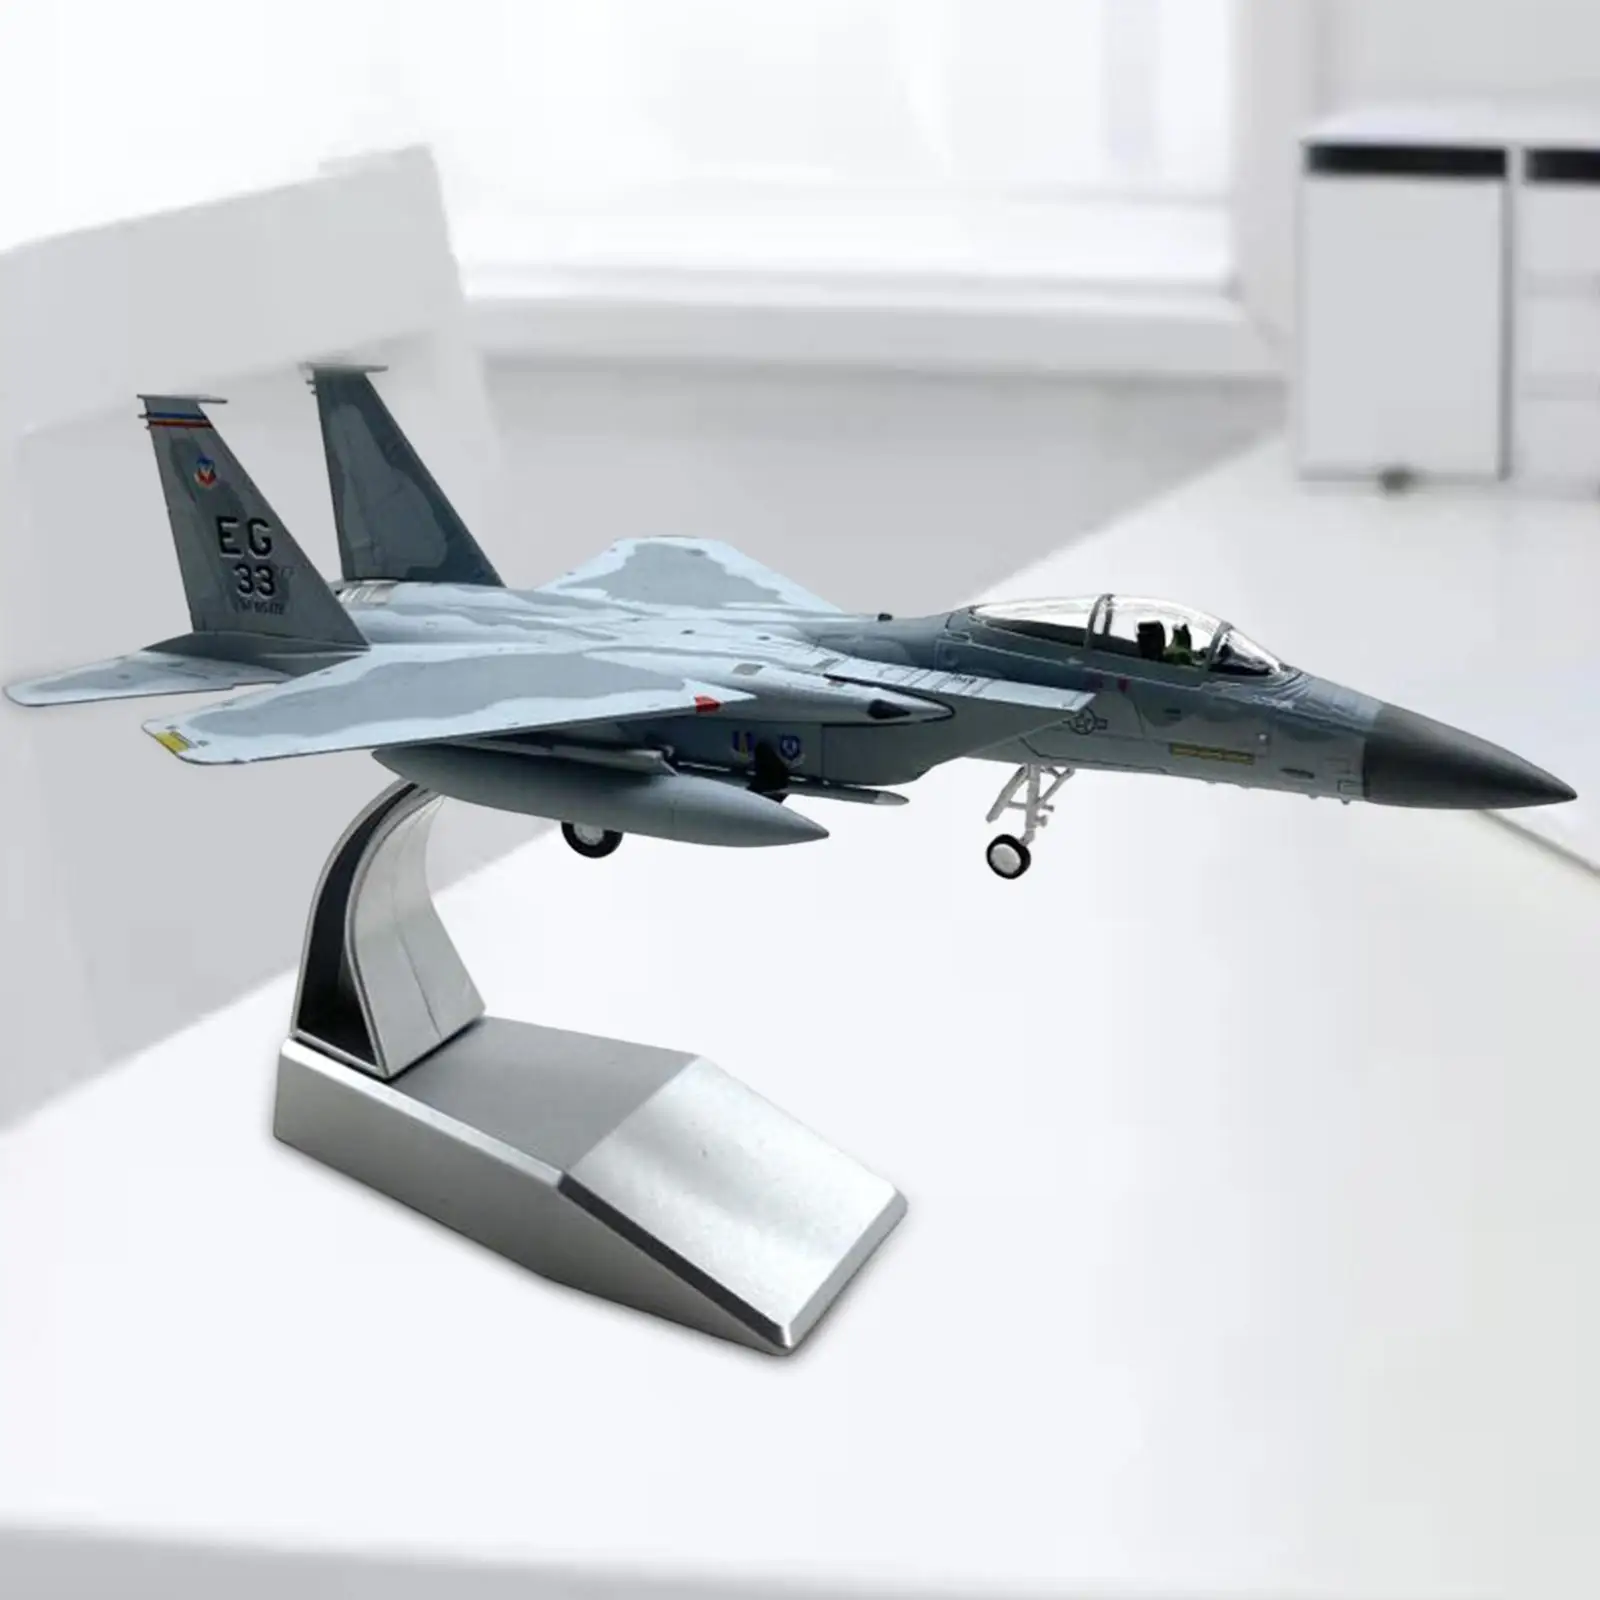 

1/100 Scale US F-15C Fighter Model with Display Stand Durable Professional Multipurpose Lifelike Airplane Model Plane Souvenir